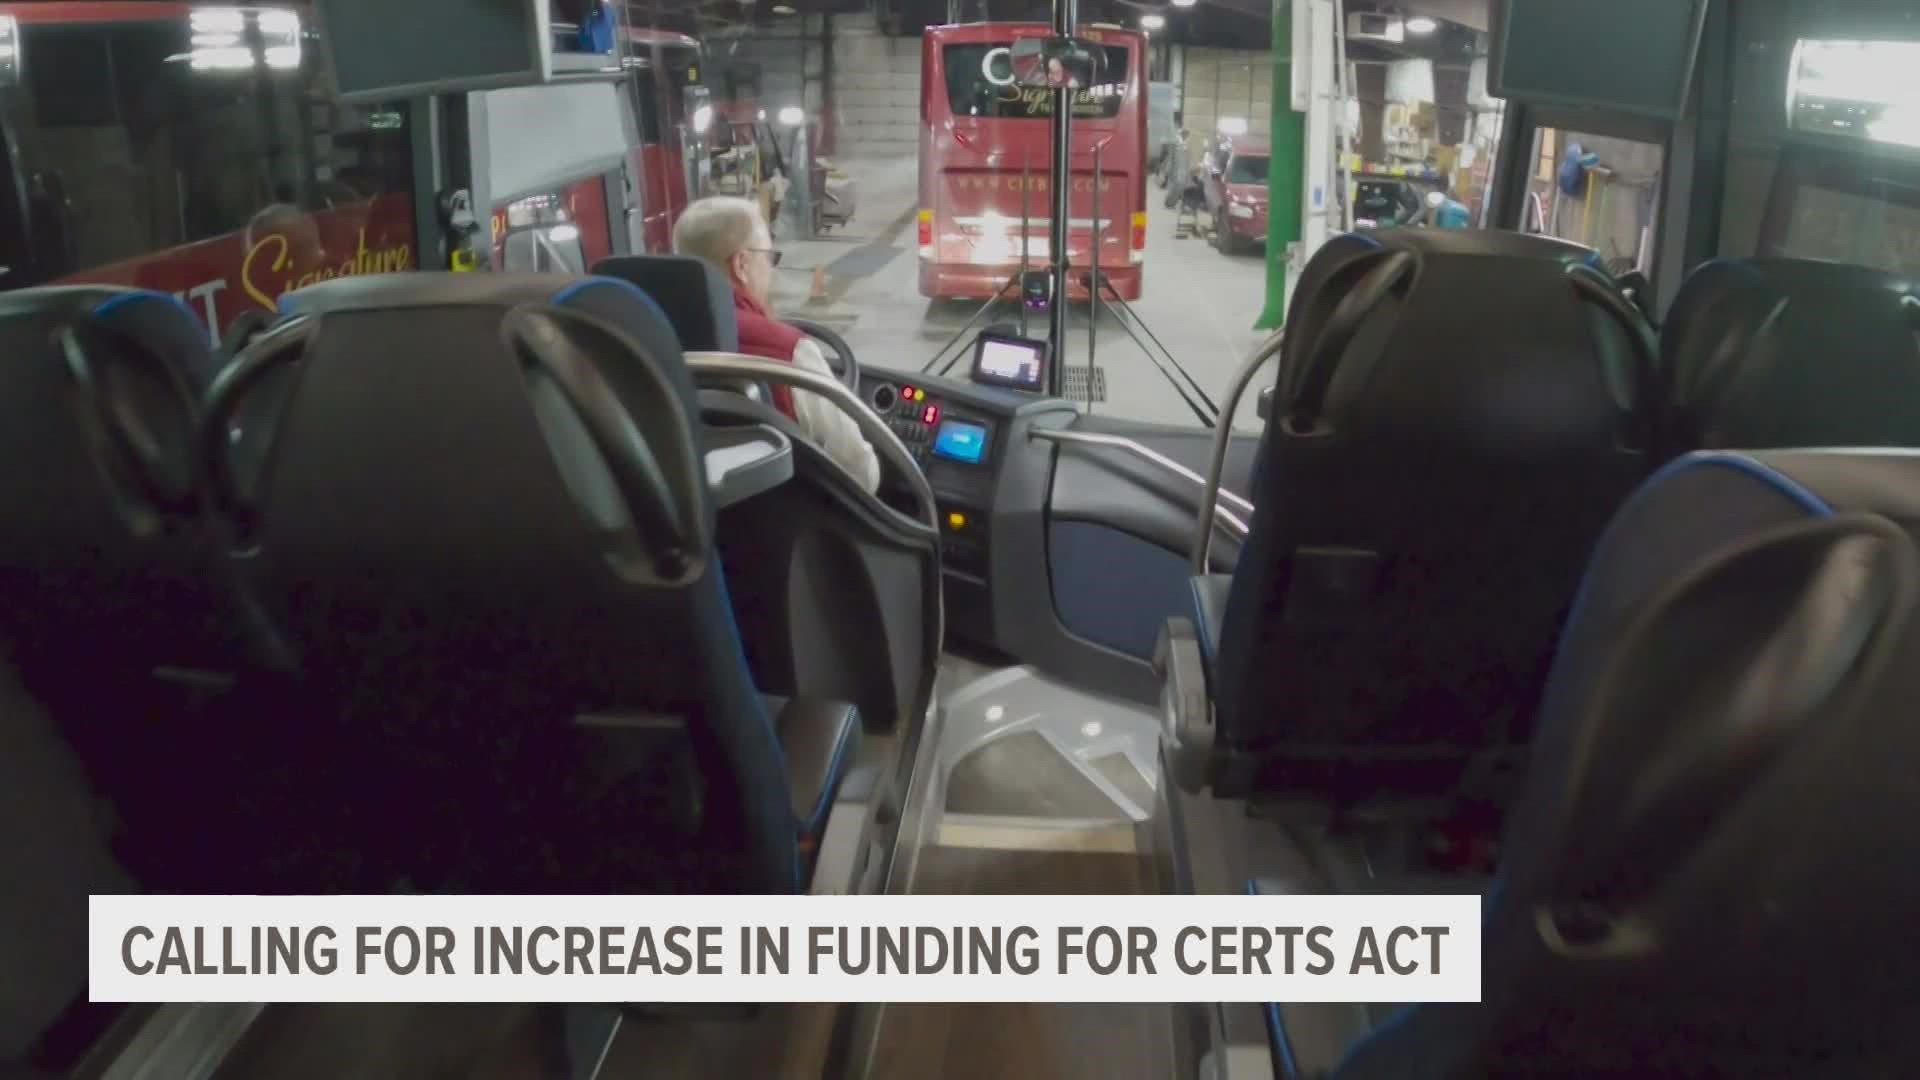 CIT has lost about a third of its employees and had to close one of its locations. Now, they want more funding for the CERTS Act.